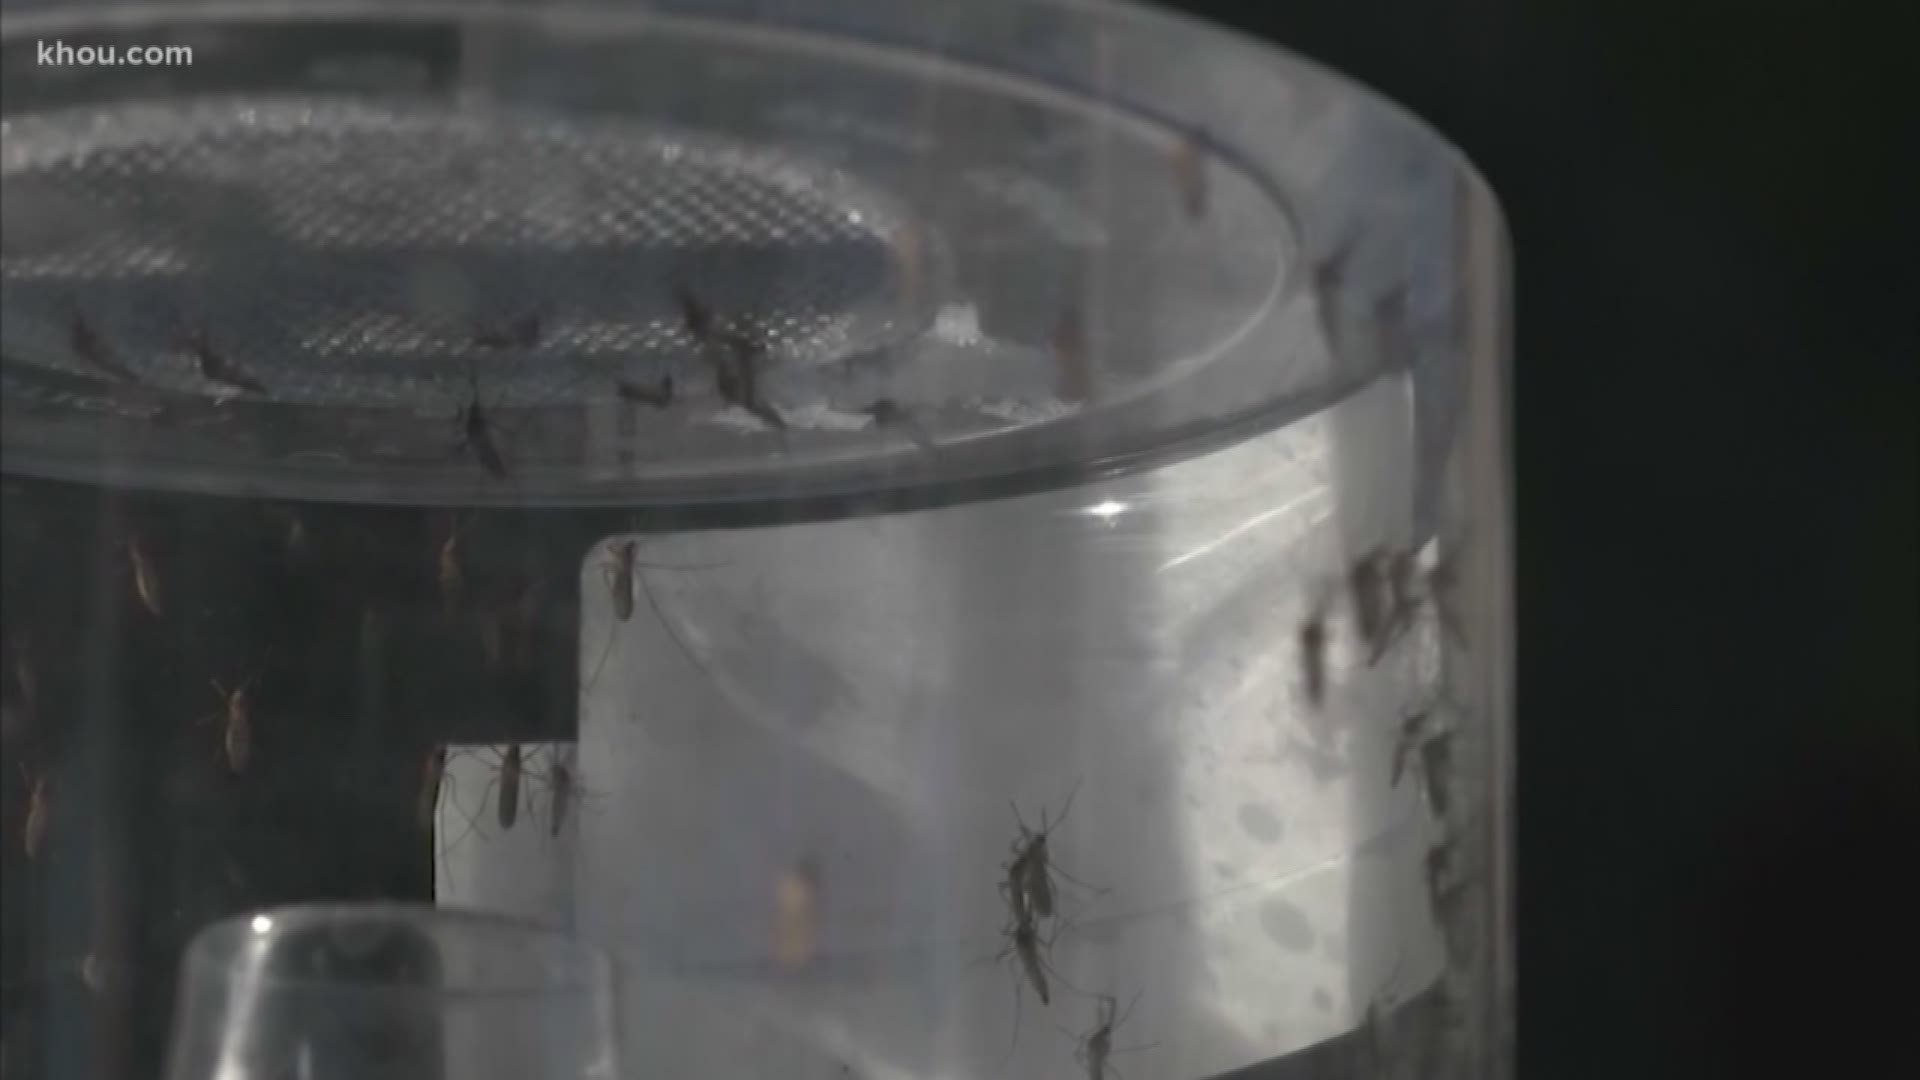 Officials say they have detected the first West Nile positive mosquito in Montgomery County. The county is already preparing to spray the area.